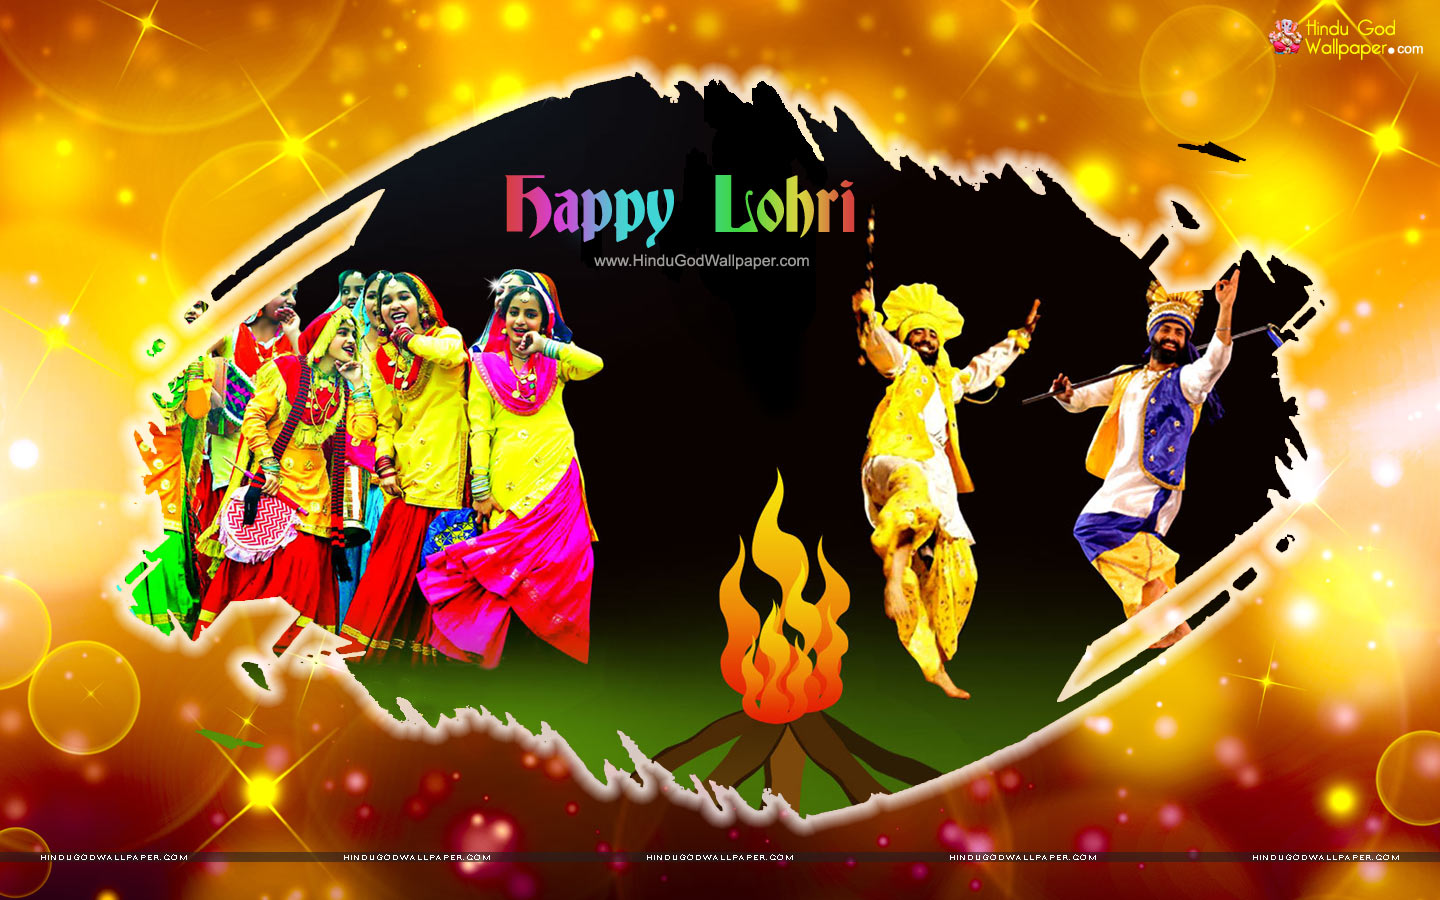 Happy Lohri HD Wallpapers Images Full Size Free Download